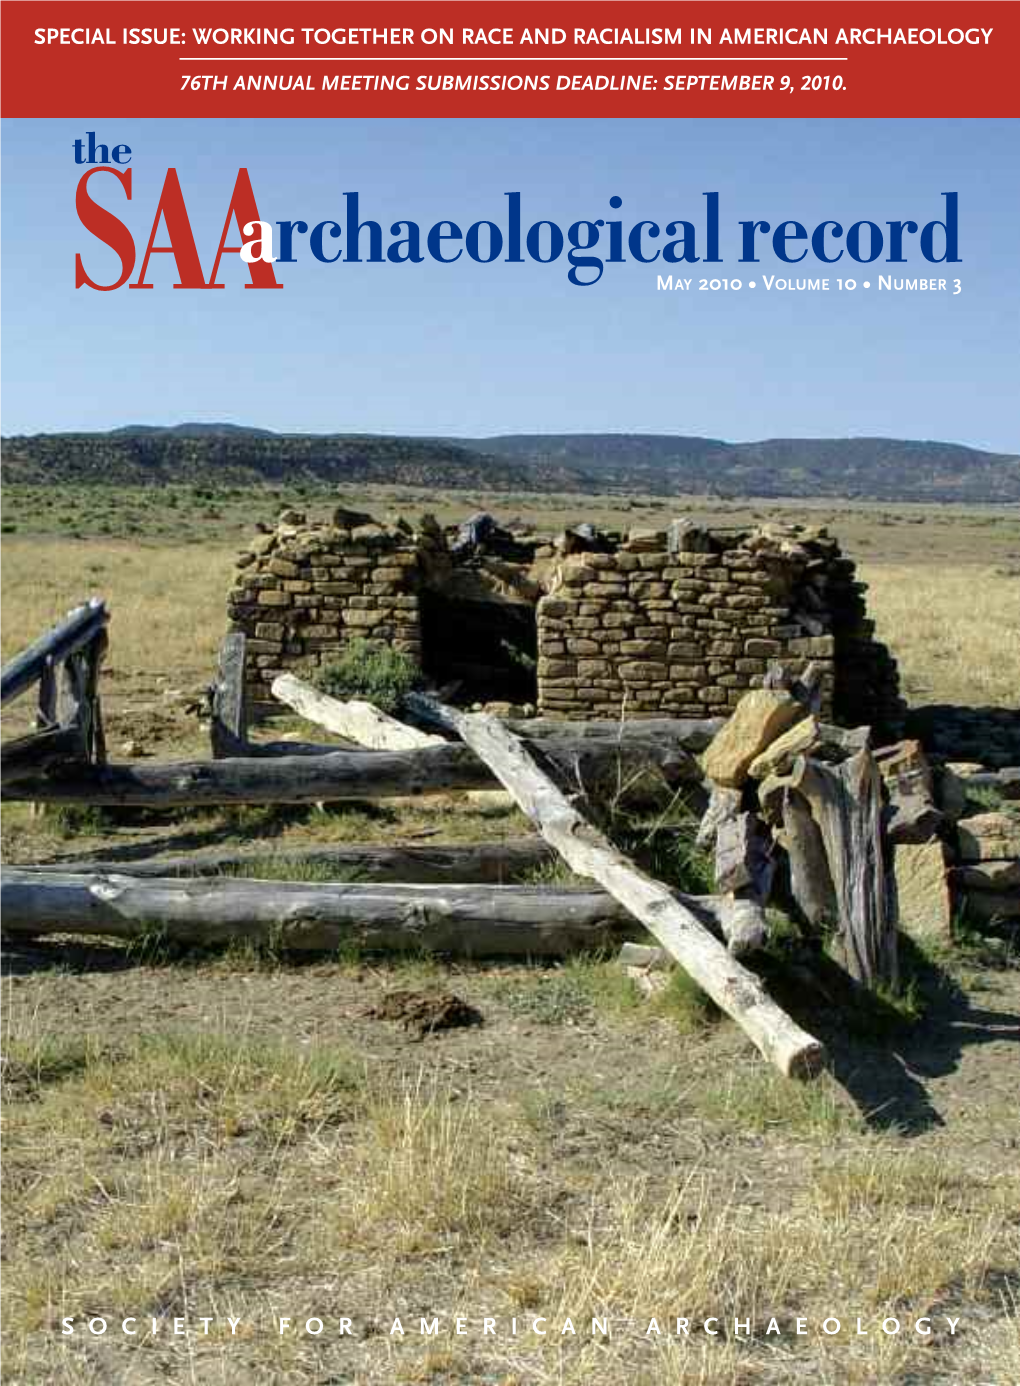 The SAA Archaeological Record